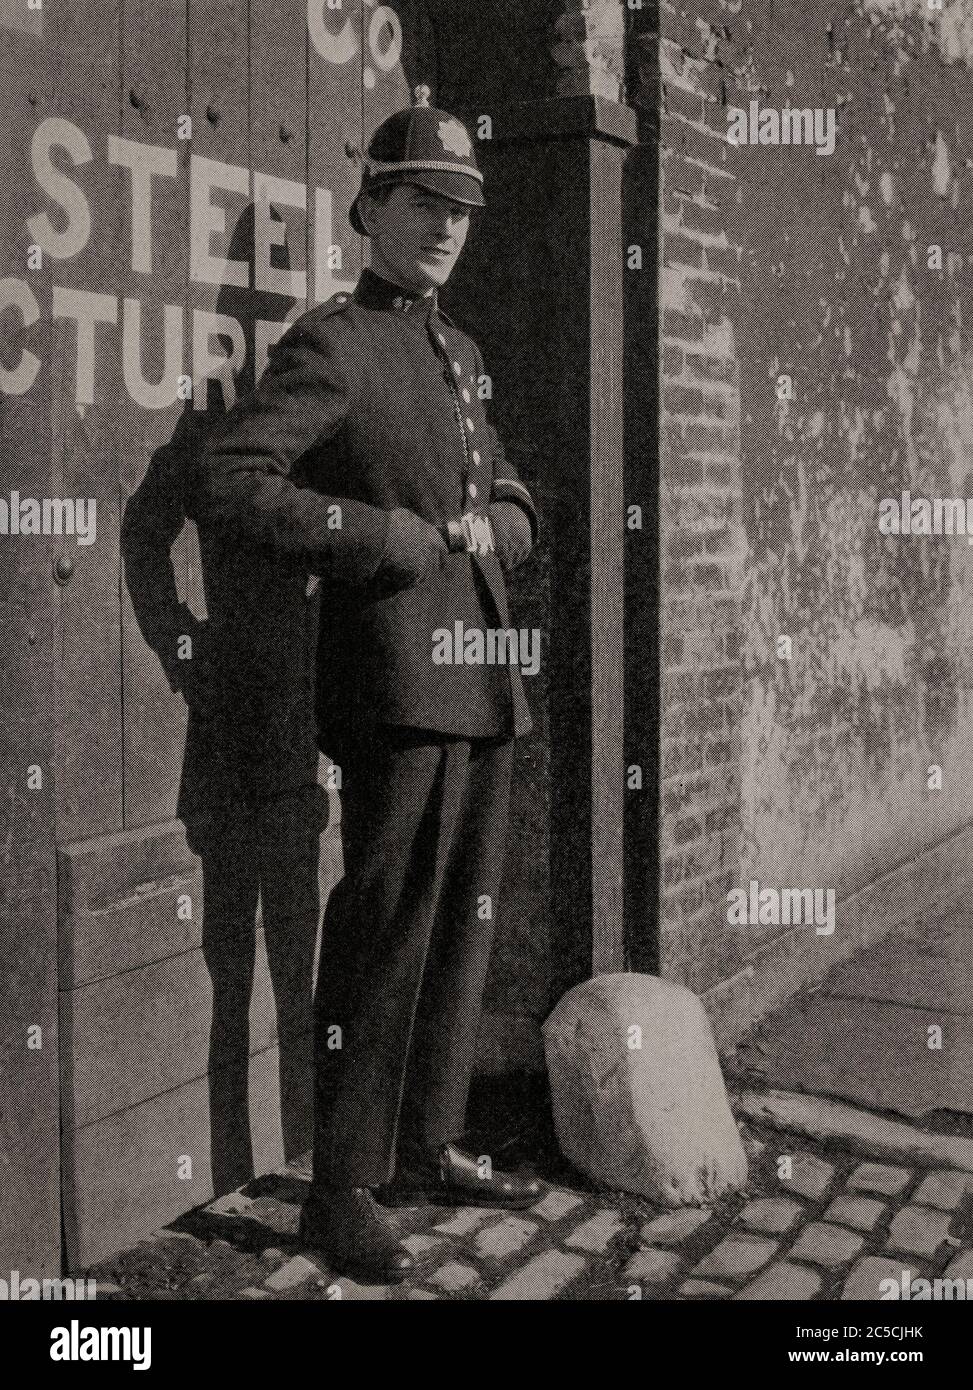 An early 1920's portrait of  a member of the Garda Siochana (police), complete with helmet in Cork City. Originally photographed by Clifton Adams (1890-1934) for 'Ireland: The Rock Whence I Was Hewn', a National Geographic Magazine feature from March 1927. Stock Photo